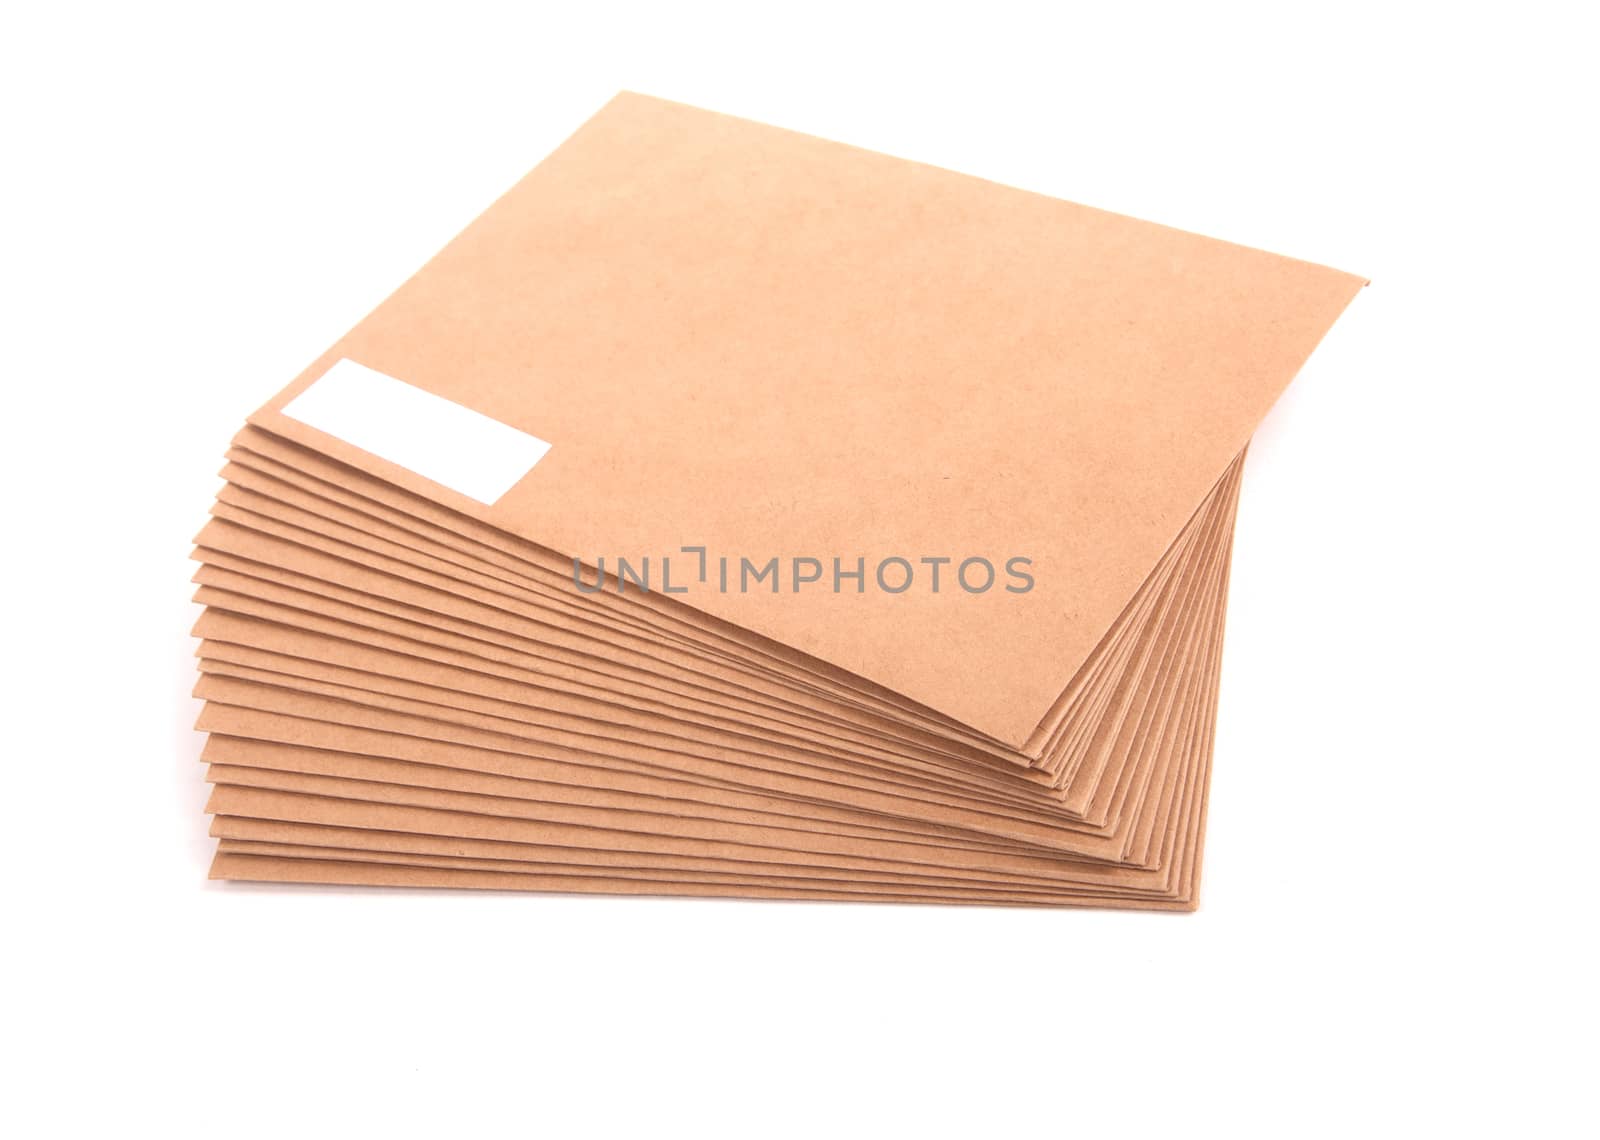 Blank envelopes isolated on white background with clipping path